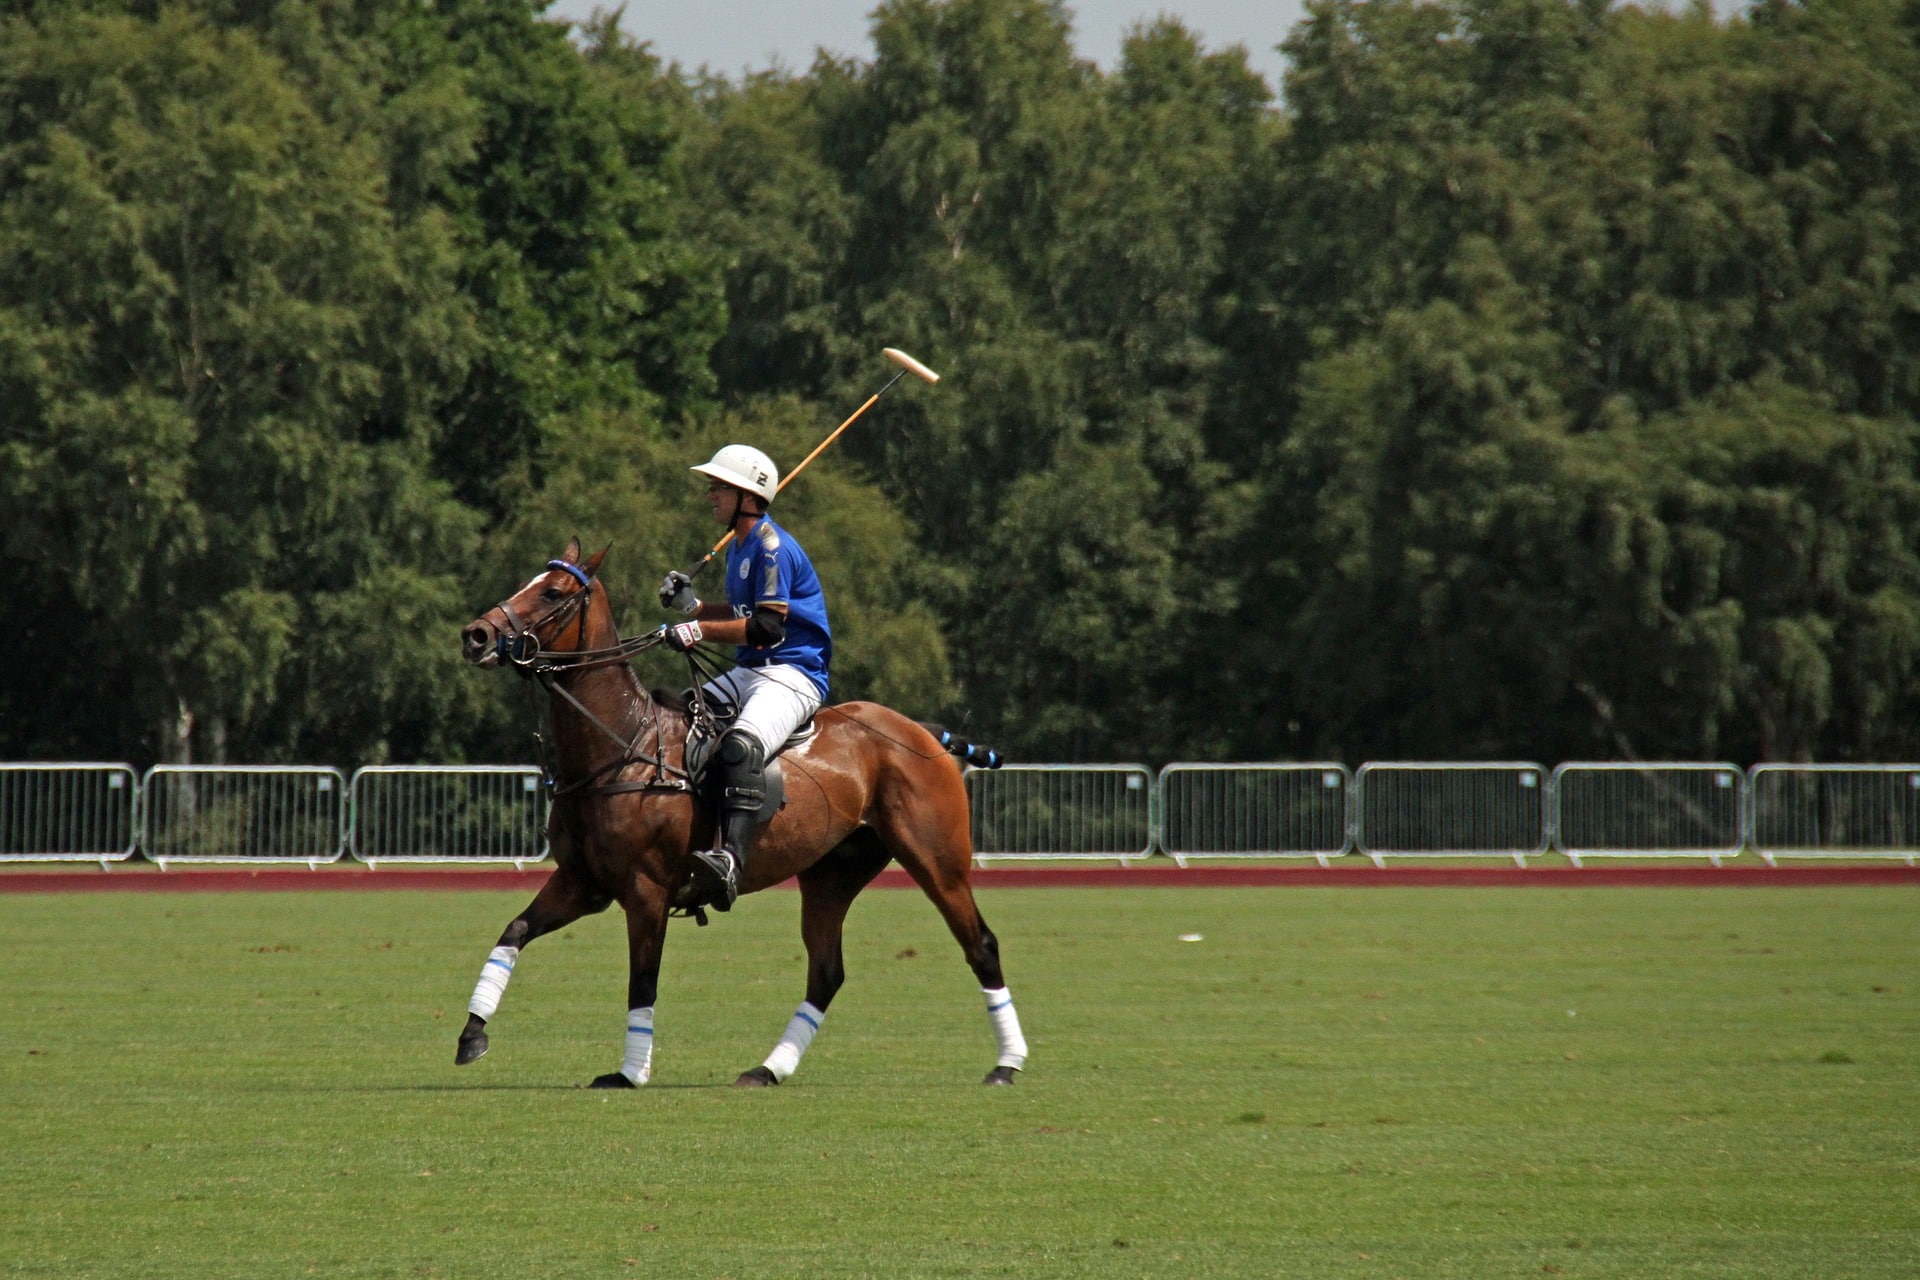 A Polo Player on a Horse